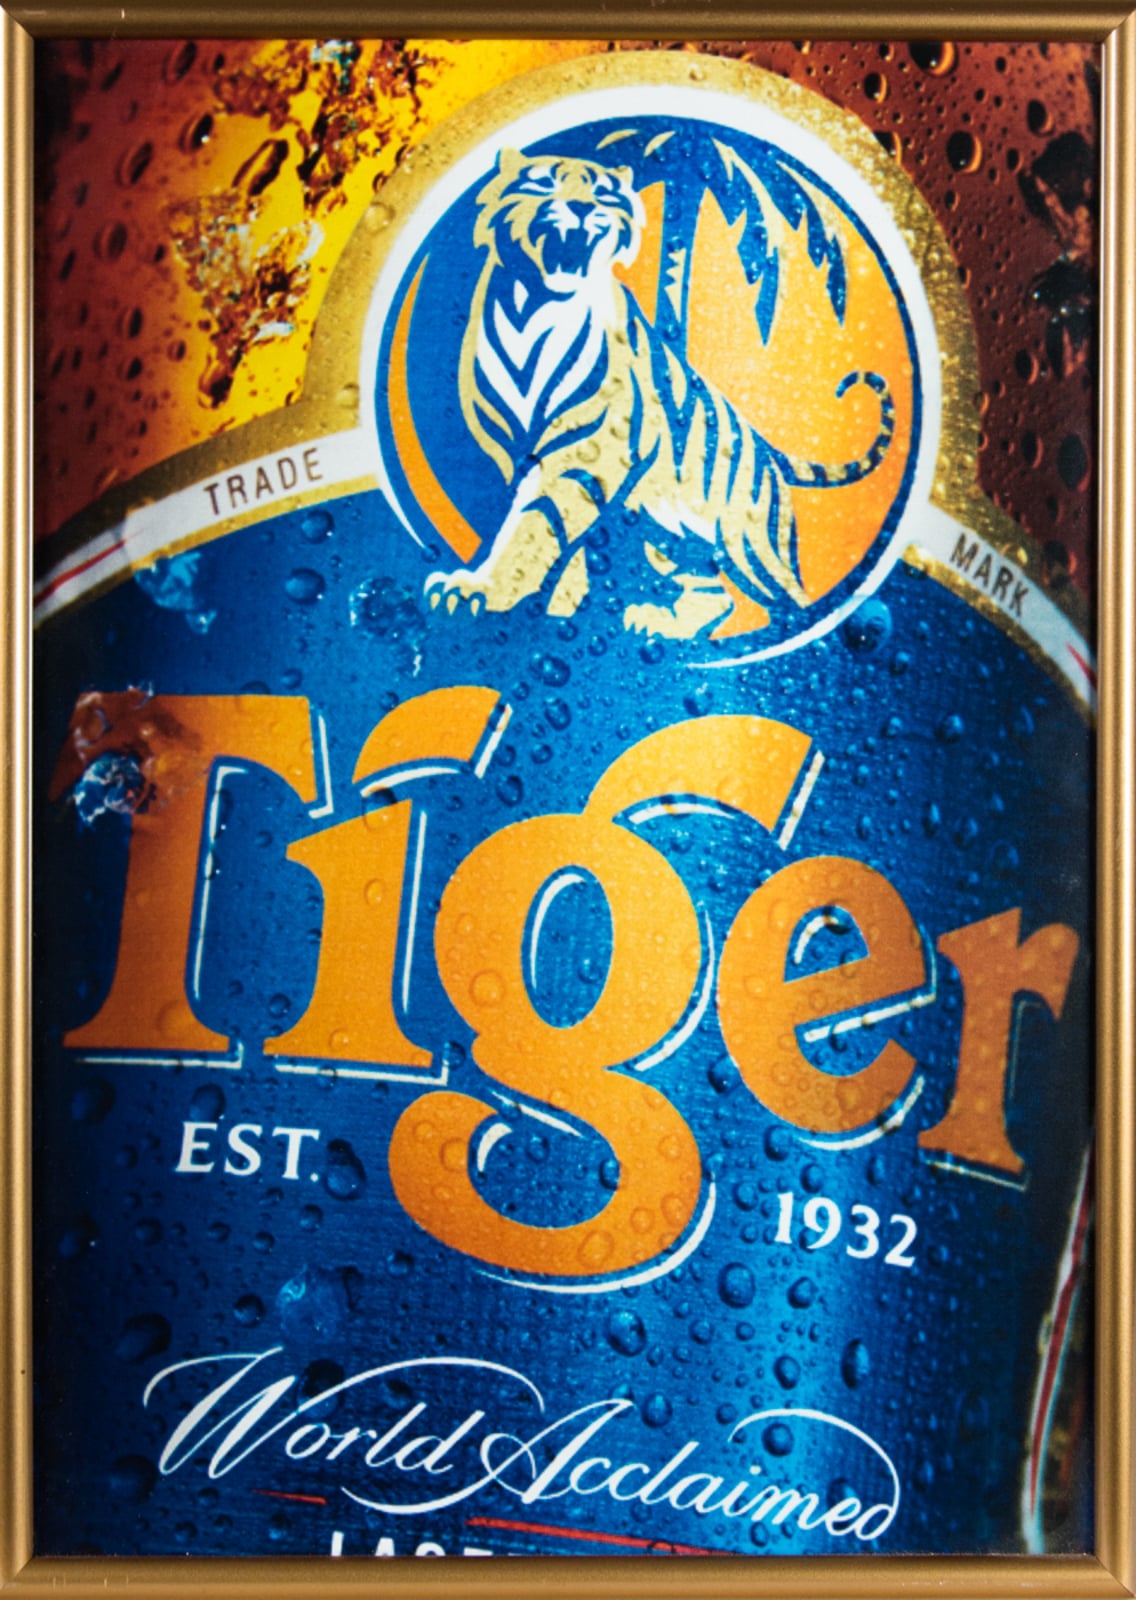 Tiger World Acclaimed Advertisement